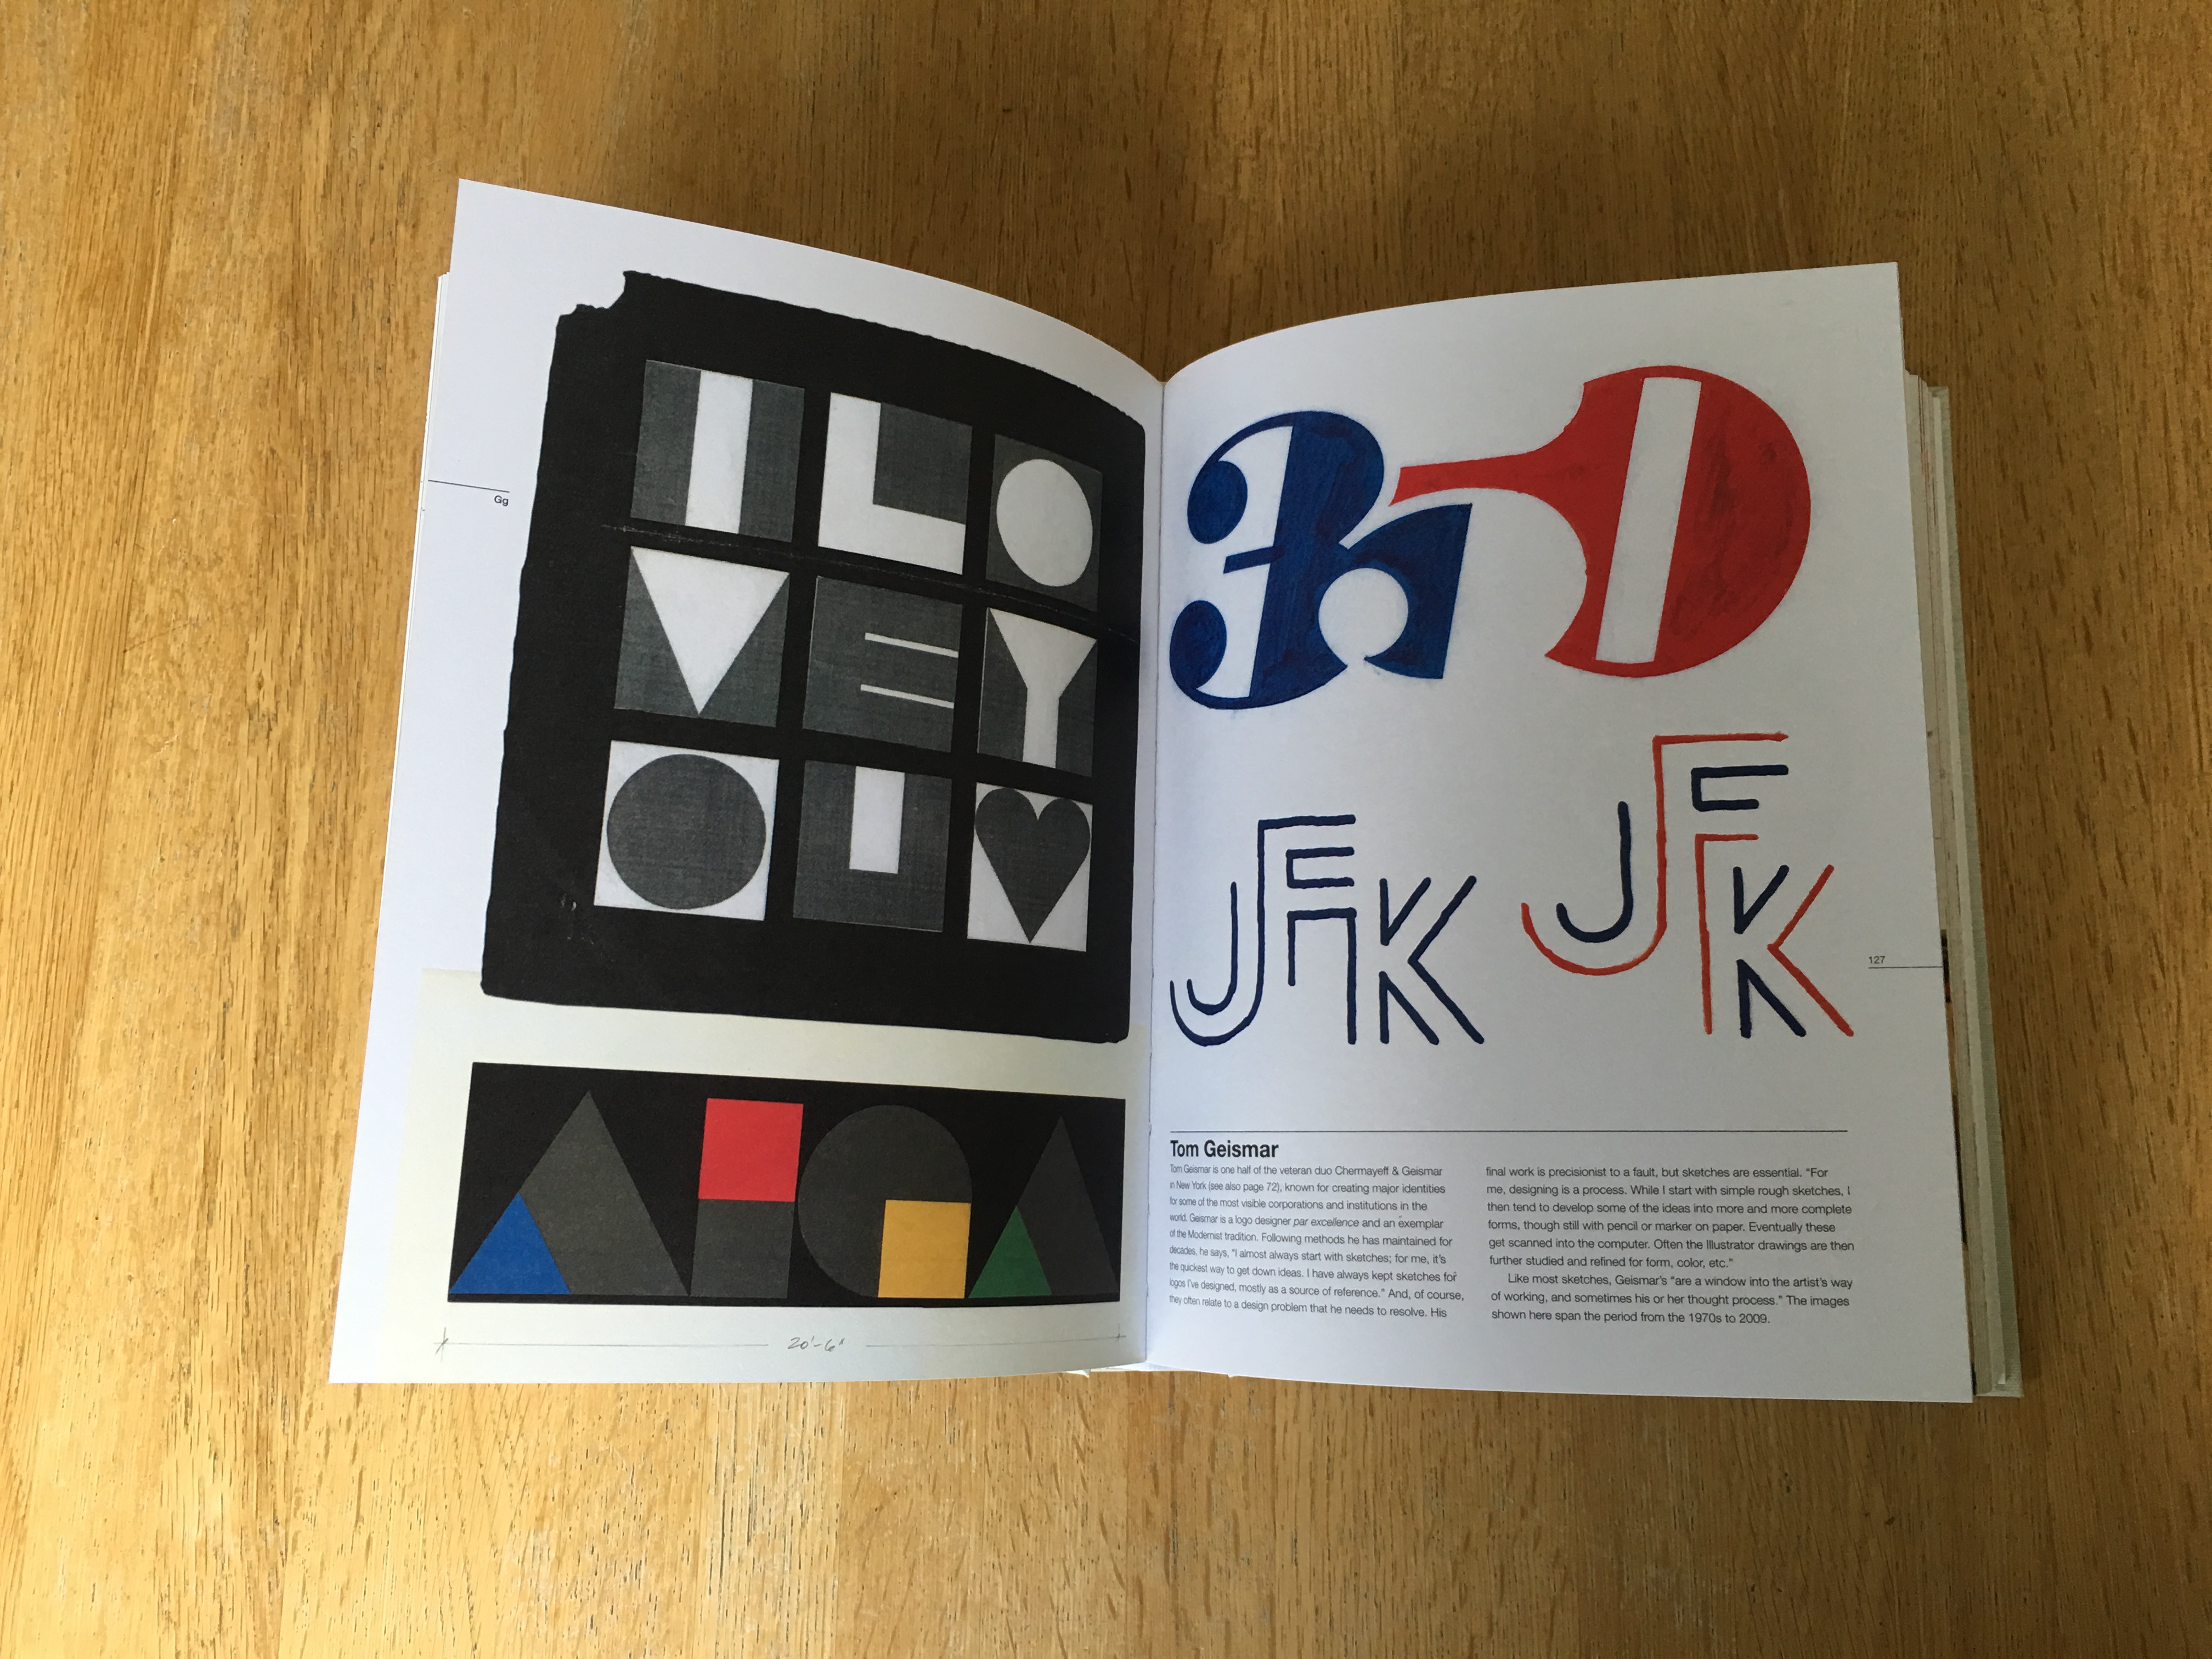 Typography Sketchbooks by Steven Heller and Lita Talarico